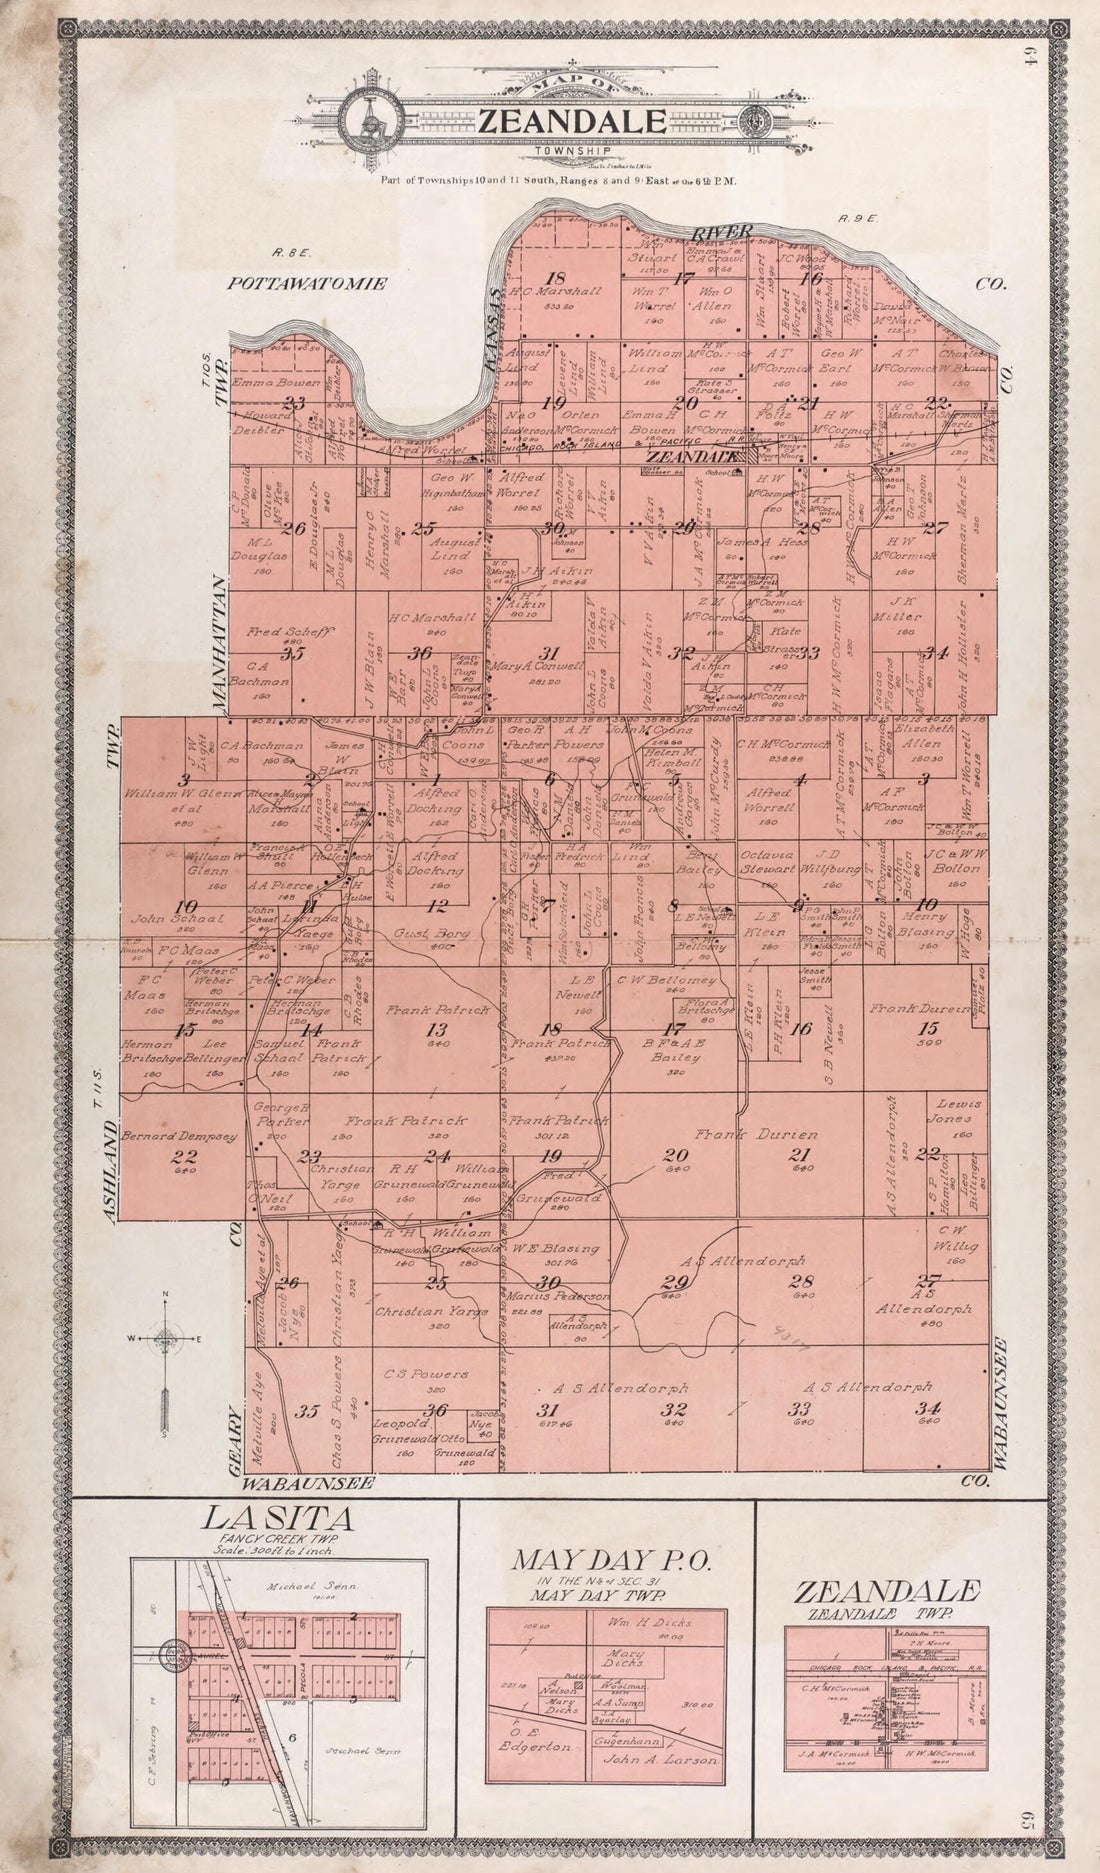 This old map of Map of Zeandale Township -- La Sita -- Mayday P.O. --Zeandale from Standard Atlas of Riley County, Kansas from 1909 was created by  Geo. A. Ogle &amp; Co in 1909